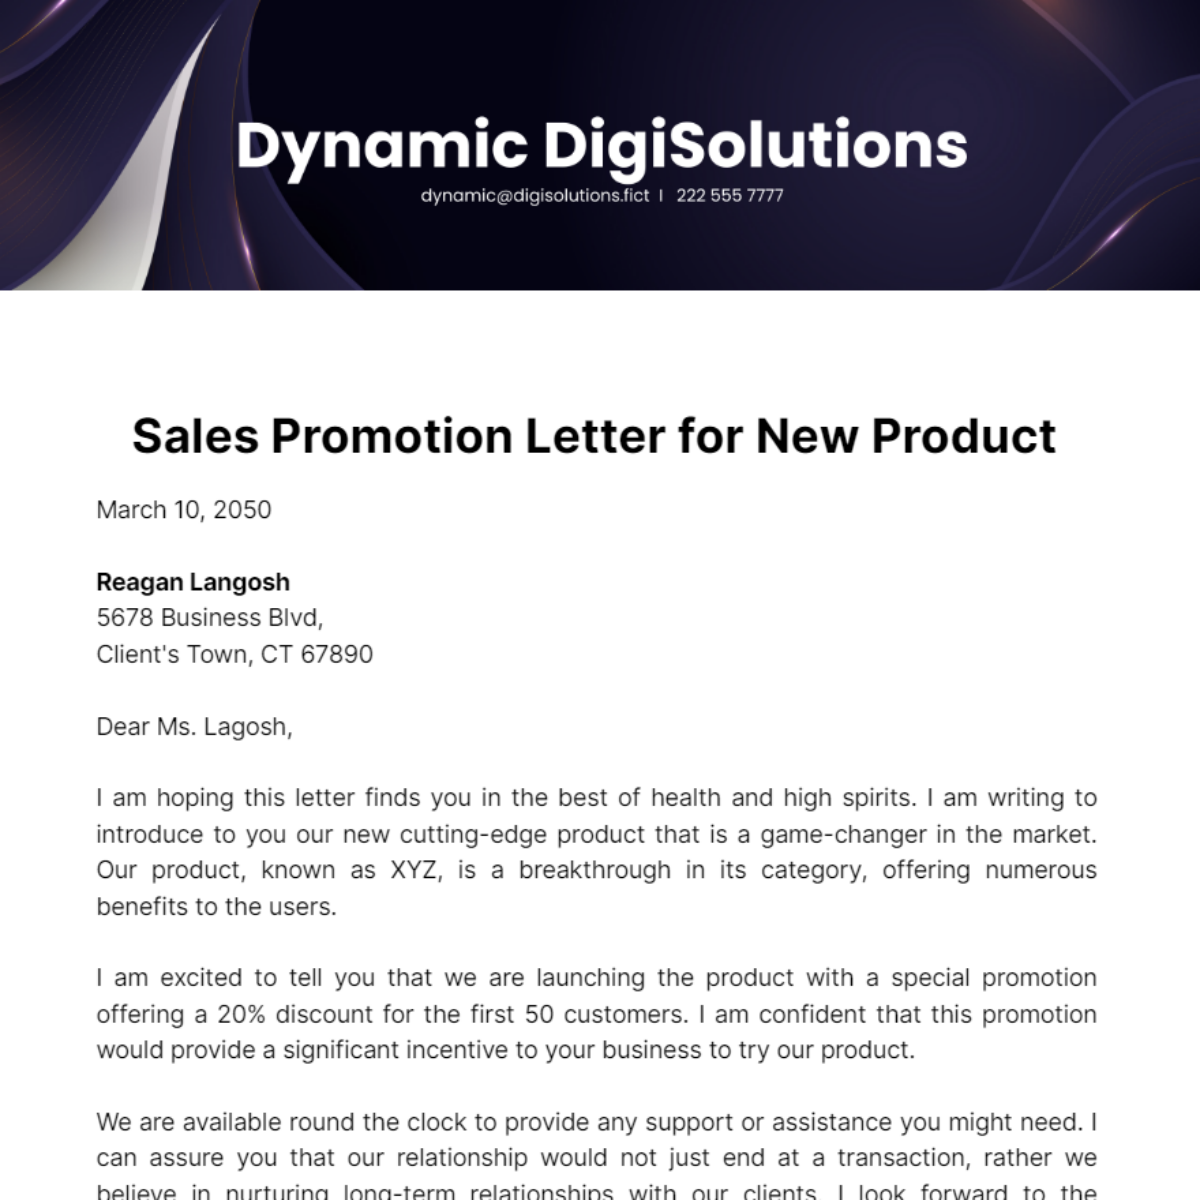 Free Sales Promotion Letter for New Product Template